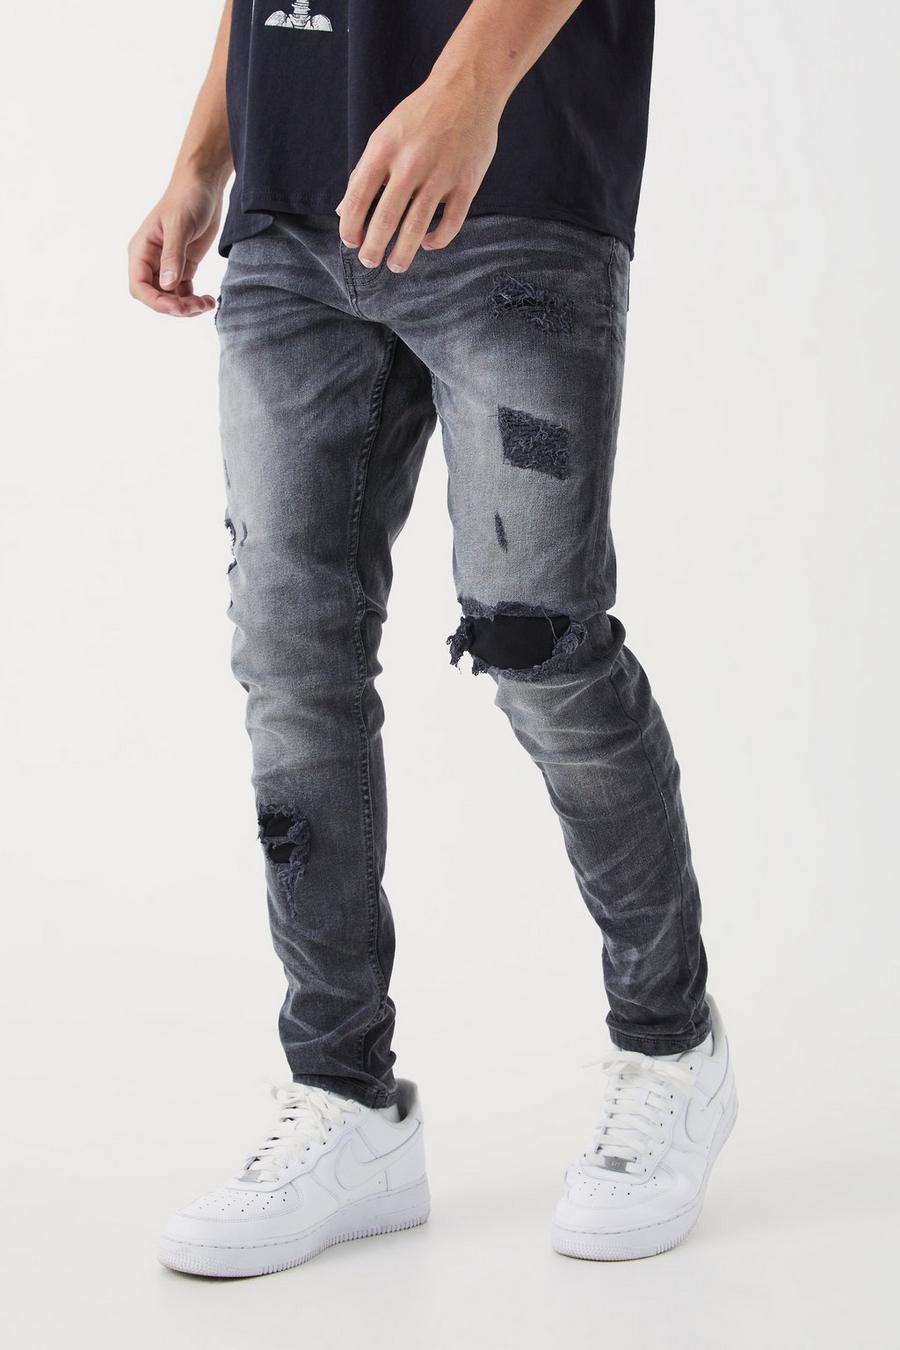 Denim Trousers Men Skinny Ripped Jeans Pants Stretch Distressed Slim Fit  Bottoms